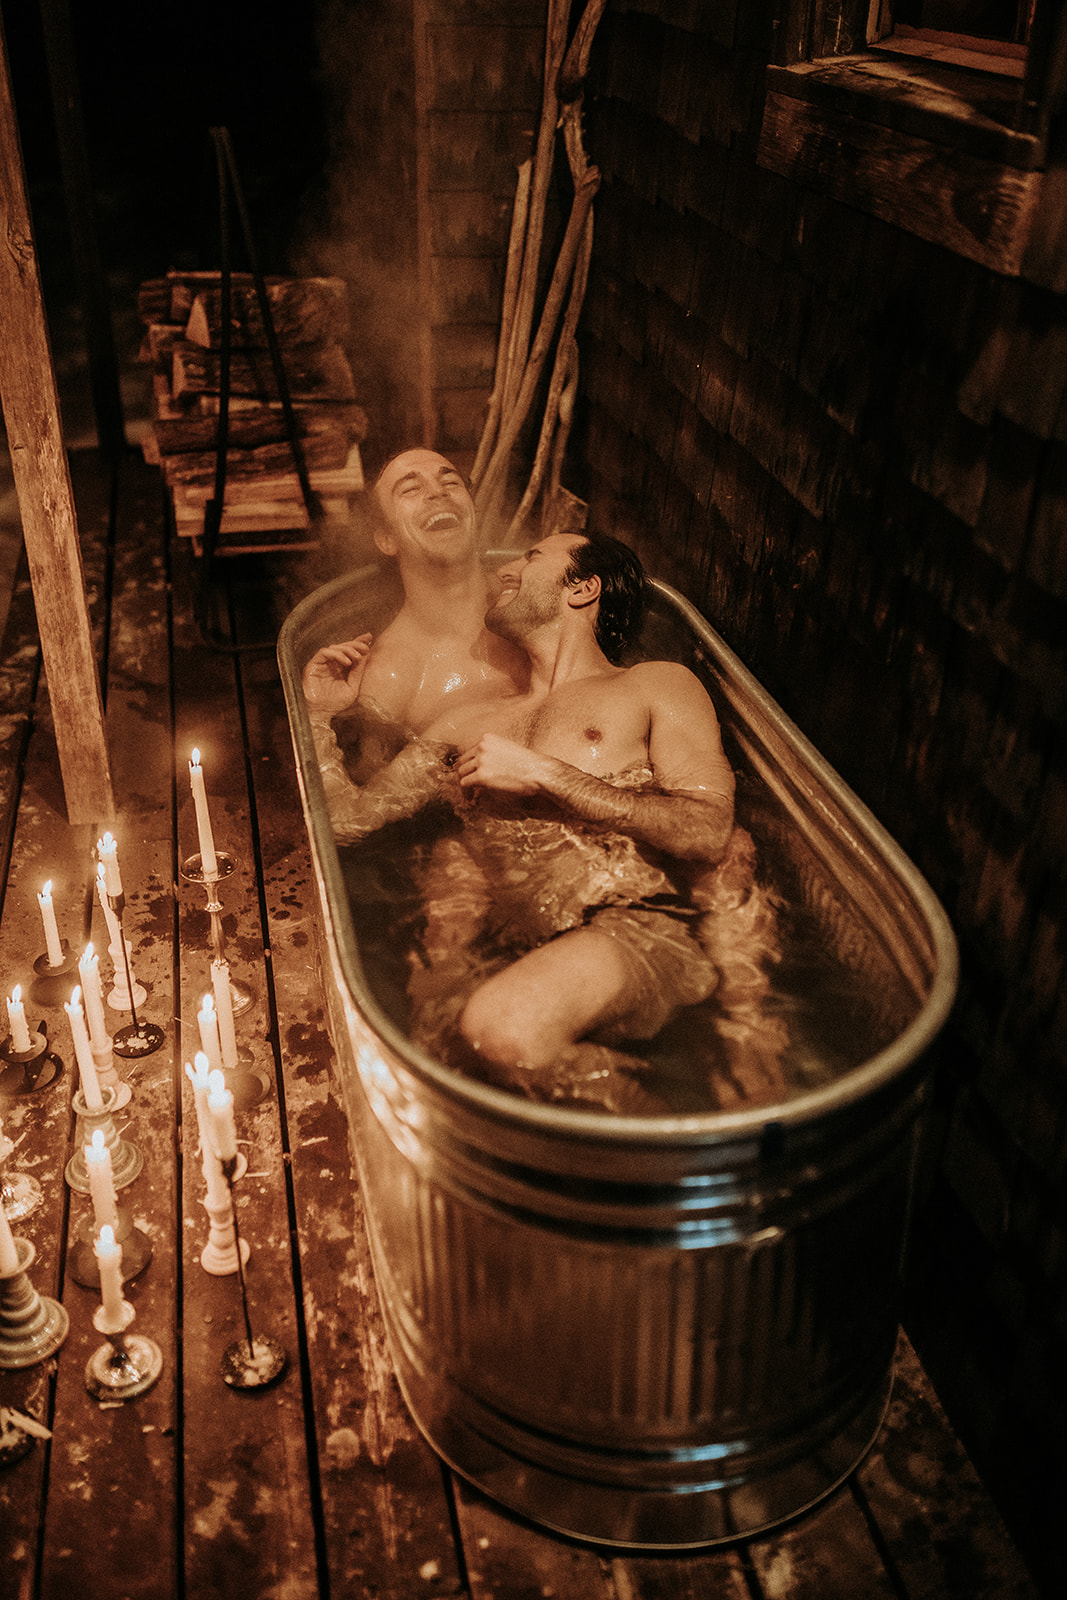 A gay couple laughing in a hot tub together.